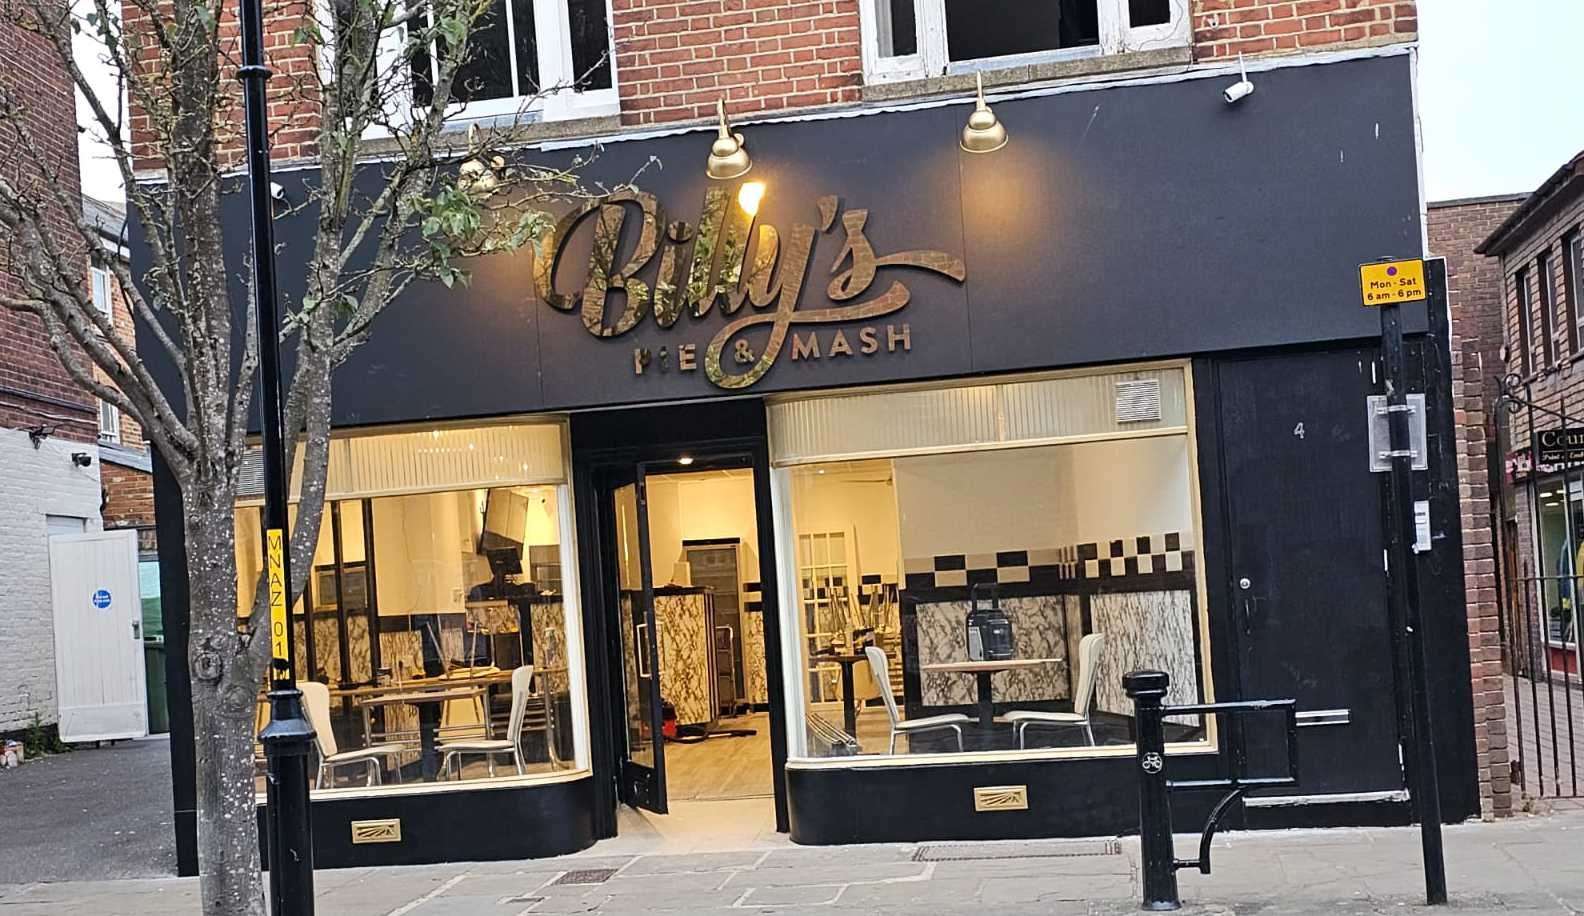 Billy's Pie and Mash opened in North Street last month